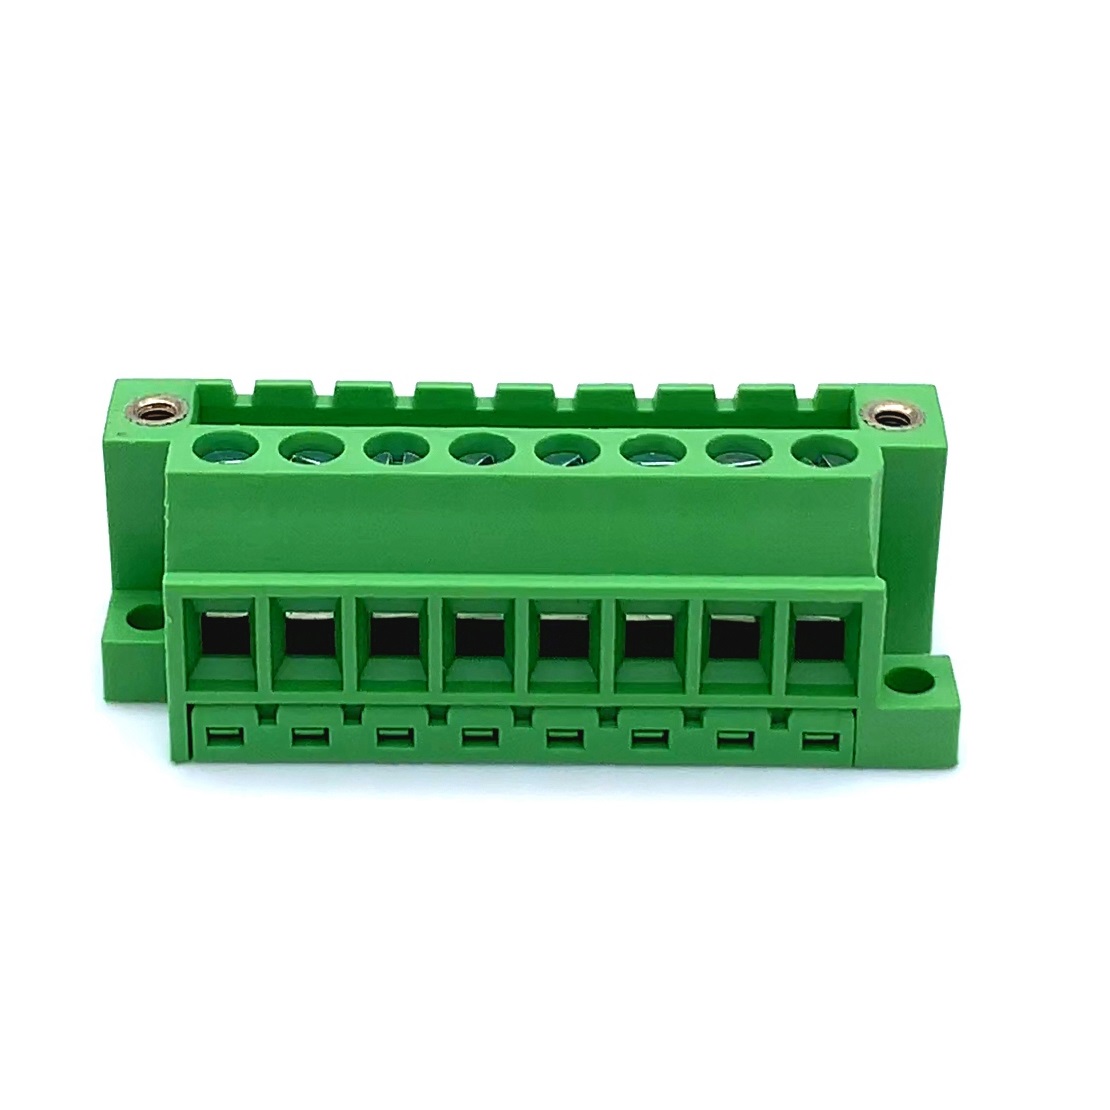 5.08mm Pitch Panel Mount Terminal Block Header with Screw Lock